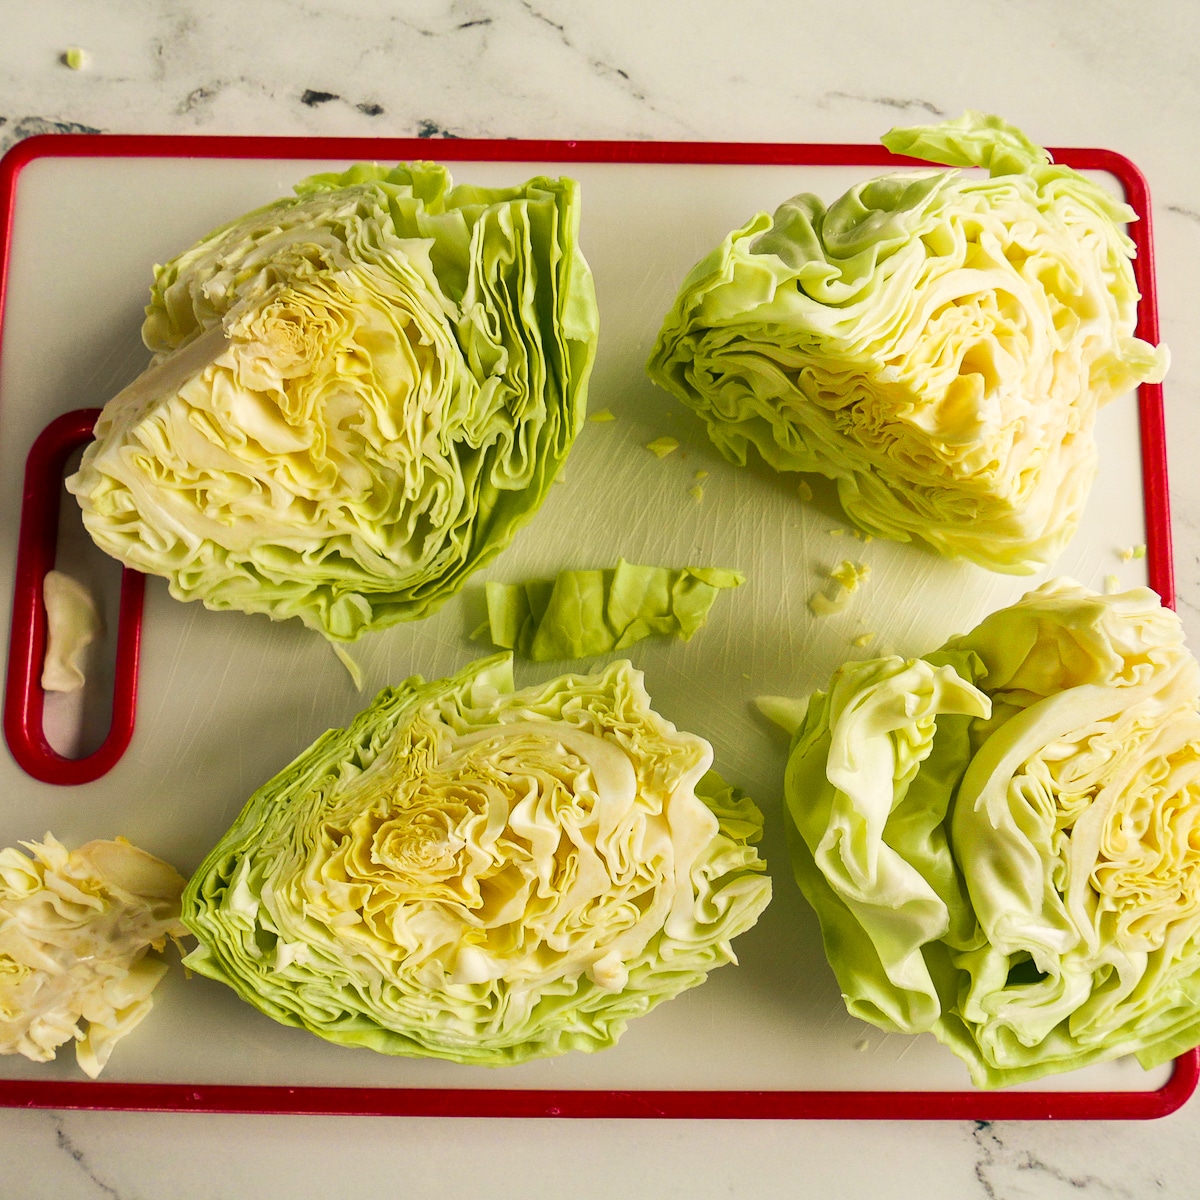 Four sliced cabbage wedges resting on a cutting board.